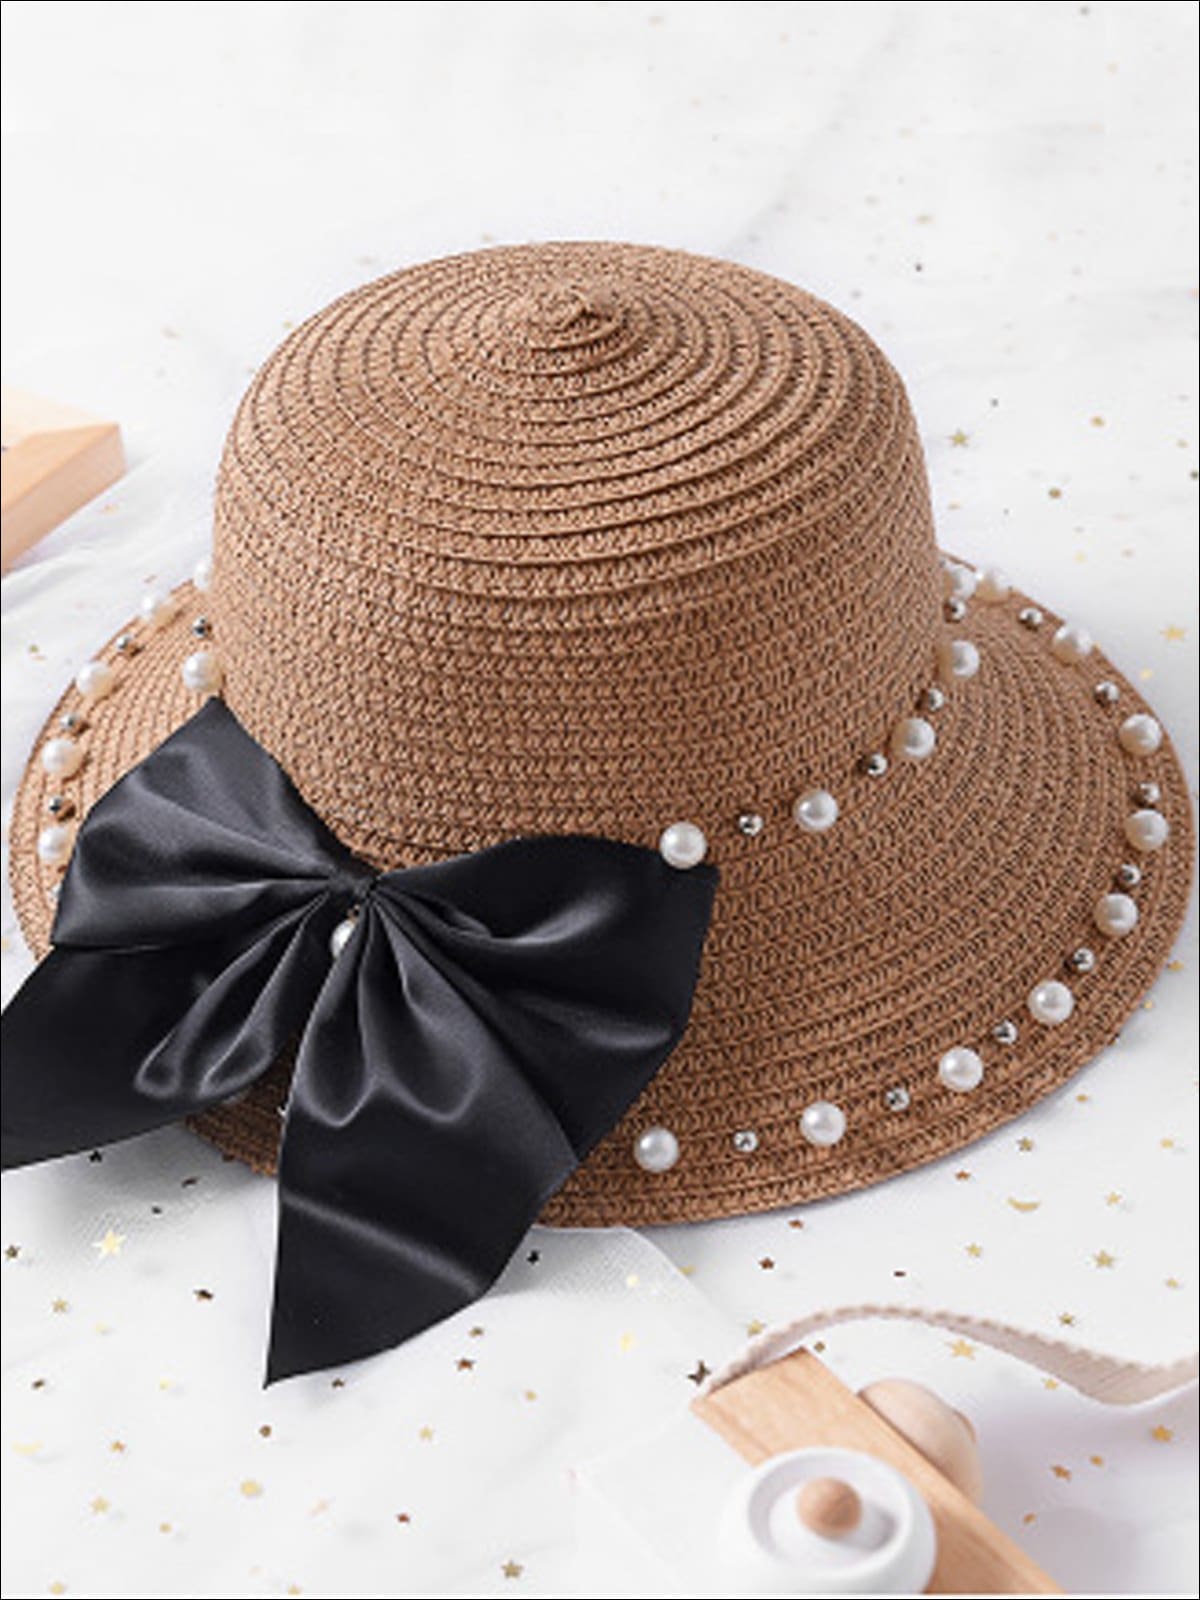 Girls Pearl and Bow Embellished Straw Hat - Tan / One Size - Girls Hats